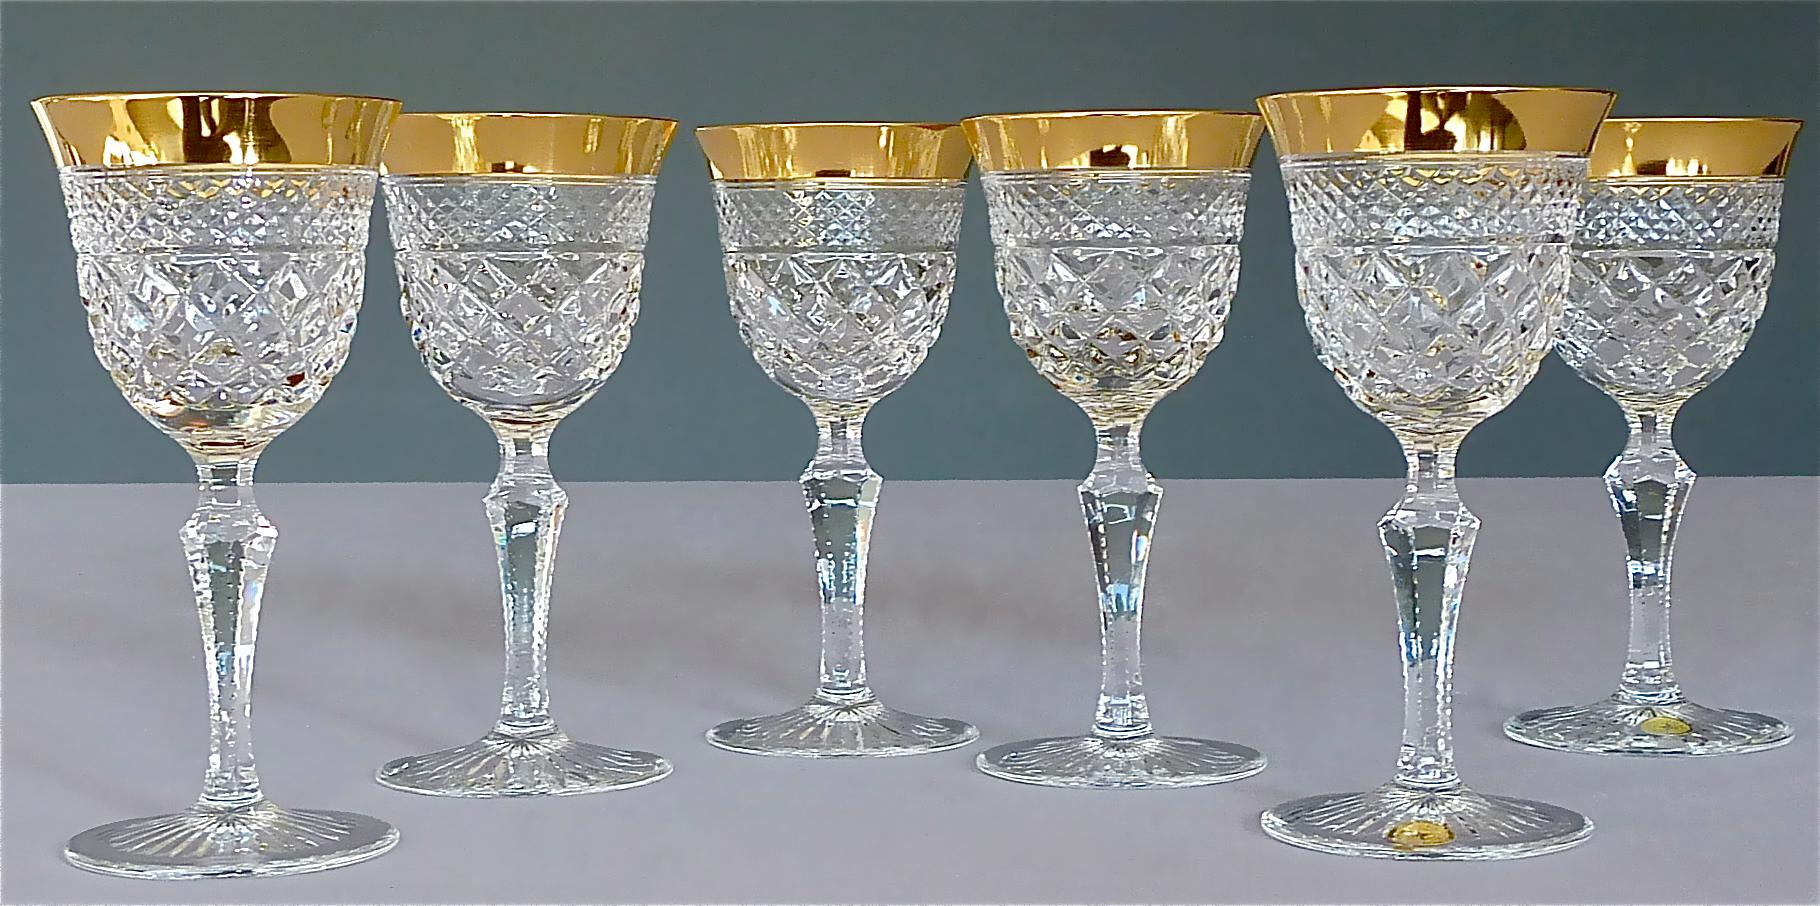 Gorgeous 20th century handcrafted faceted crystal glass set with 24-carat gold rim made by Josephinenhütte Moser circa 1960-1970 and very in the style of the exclusive French company Baccarat or Saint Louis thistle. This exquisite set of 6 wine